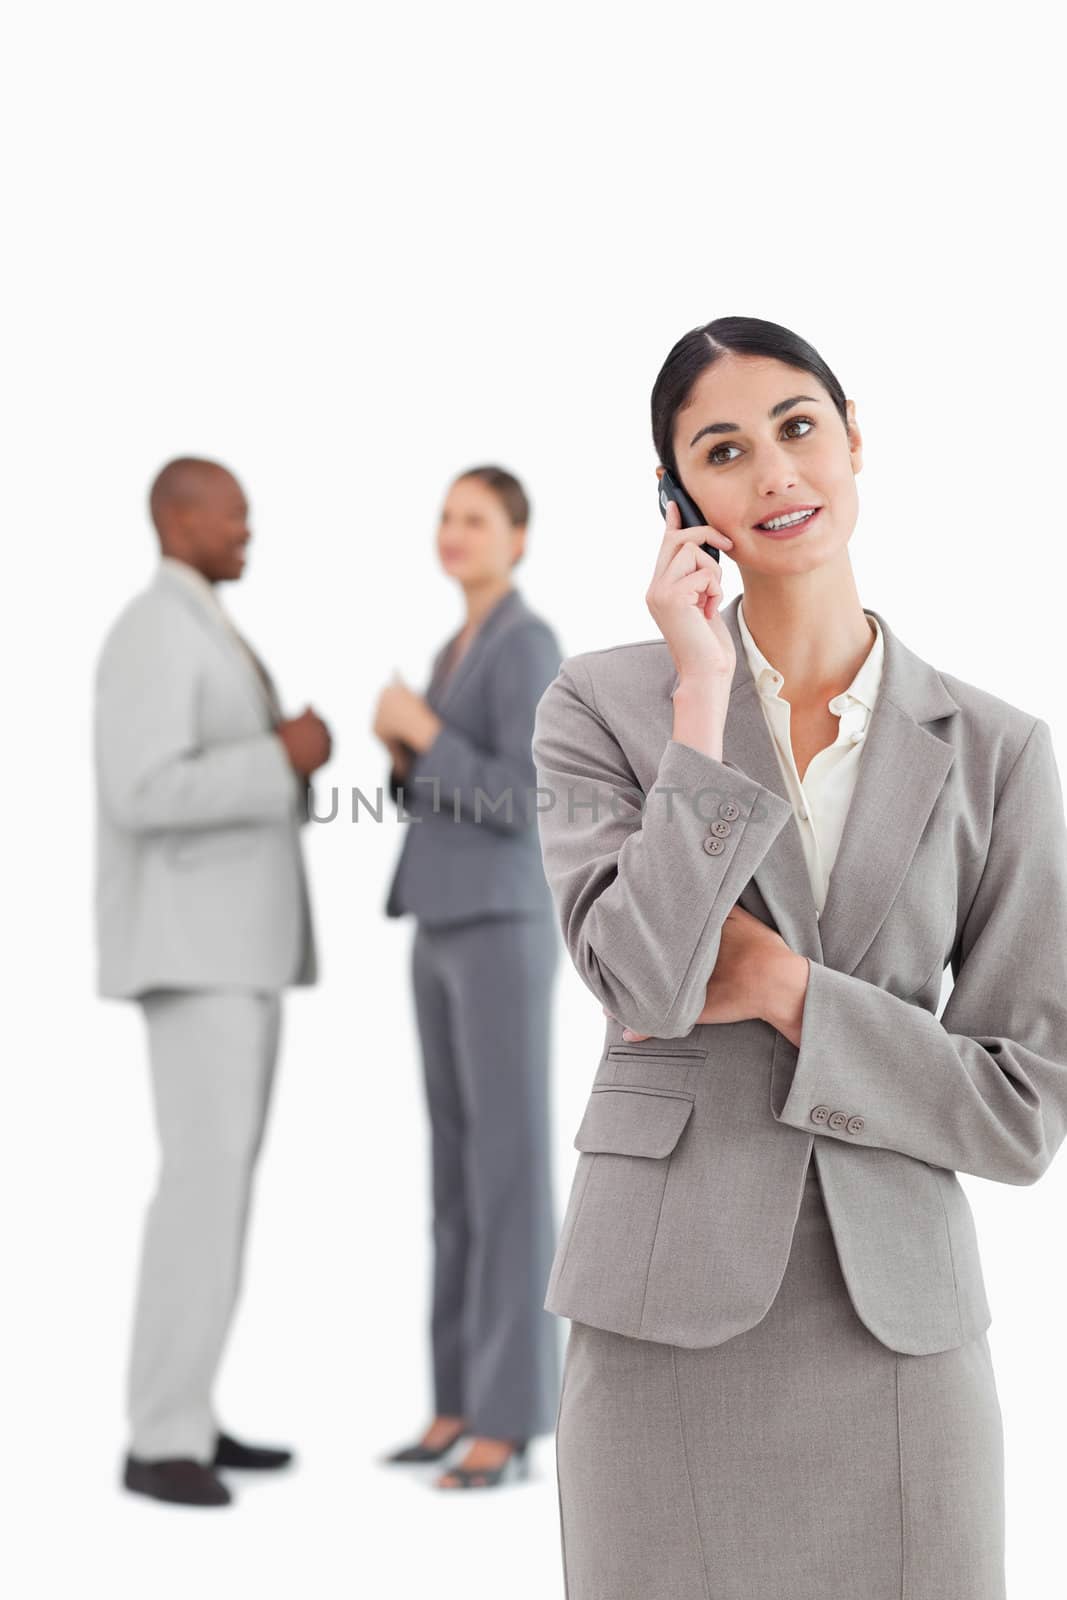 Businesswoman with cellphone and colleagues behind her against a white background